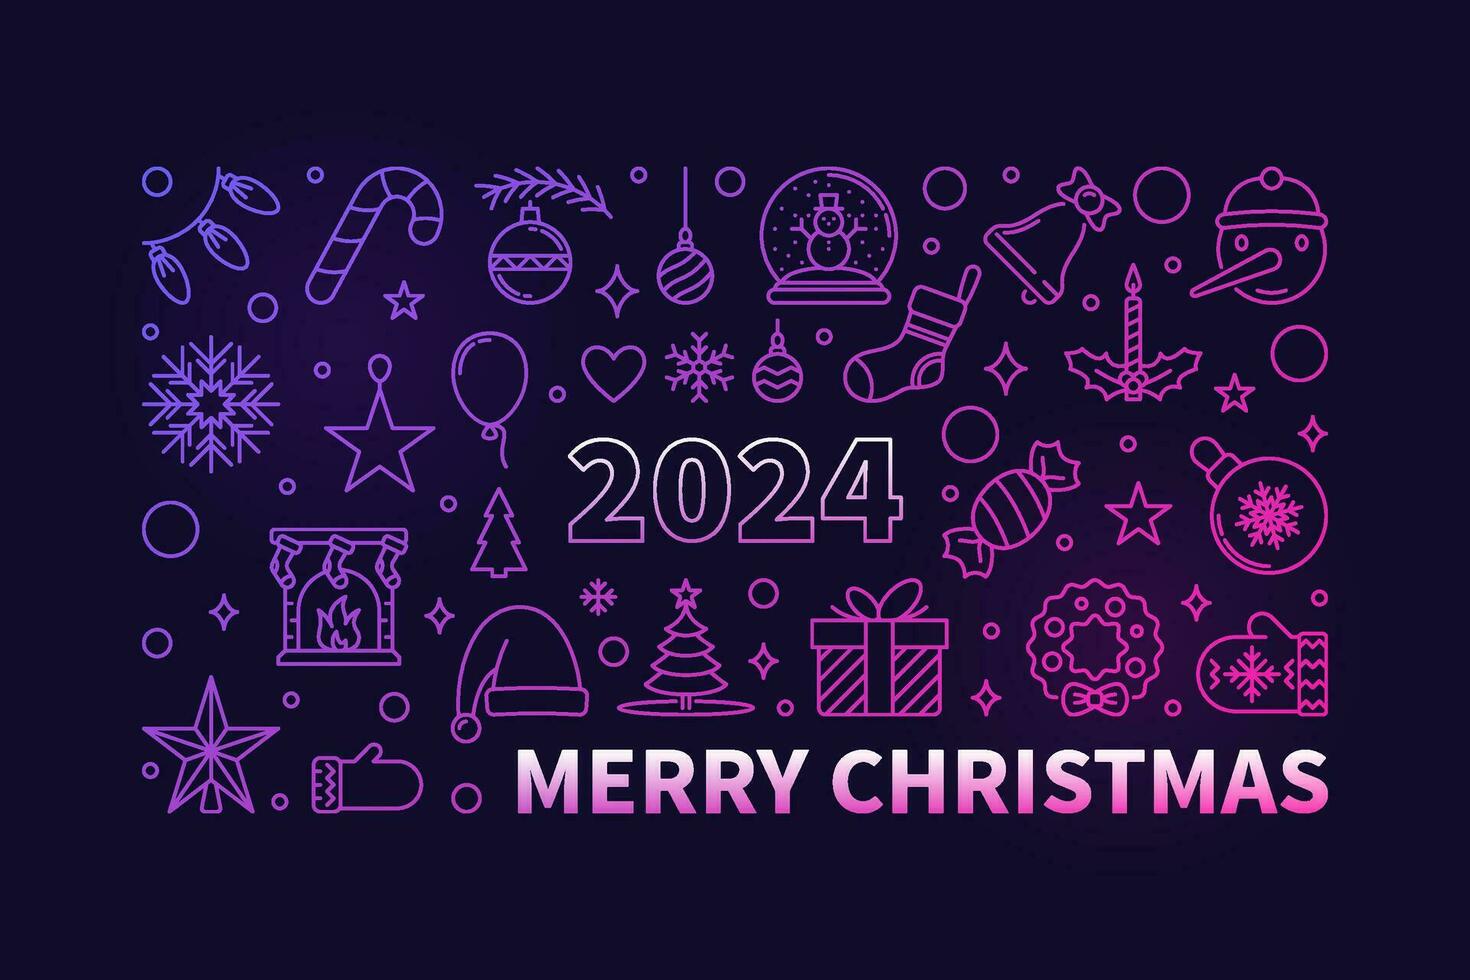 Merry Xmas colored outline banner - vector 2024 Christmas horizontal illustration